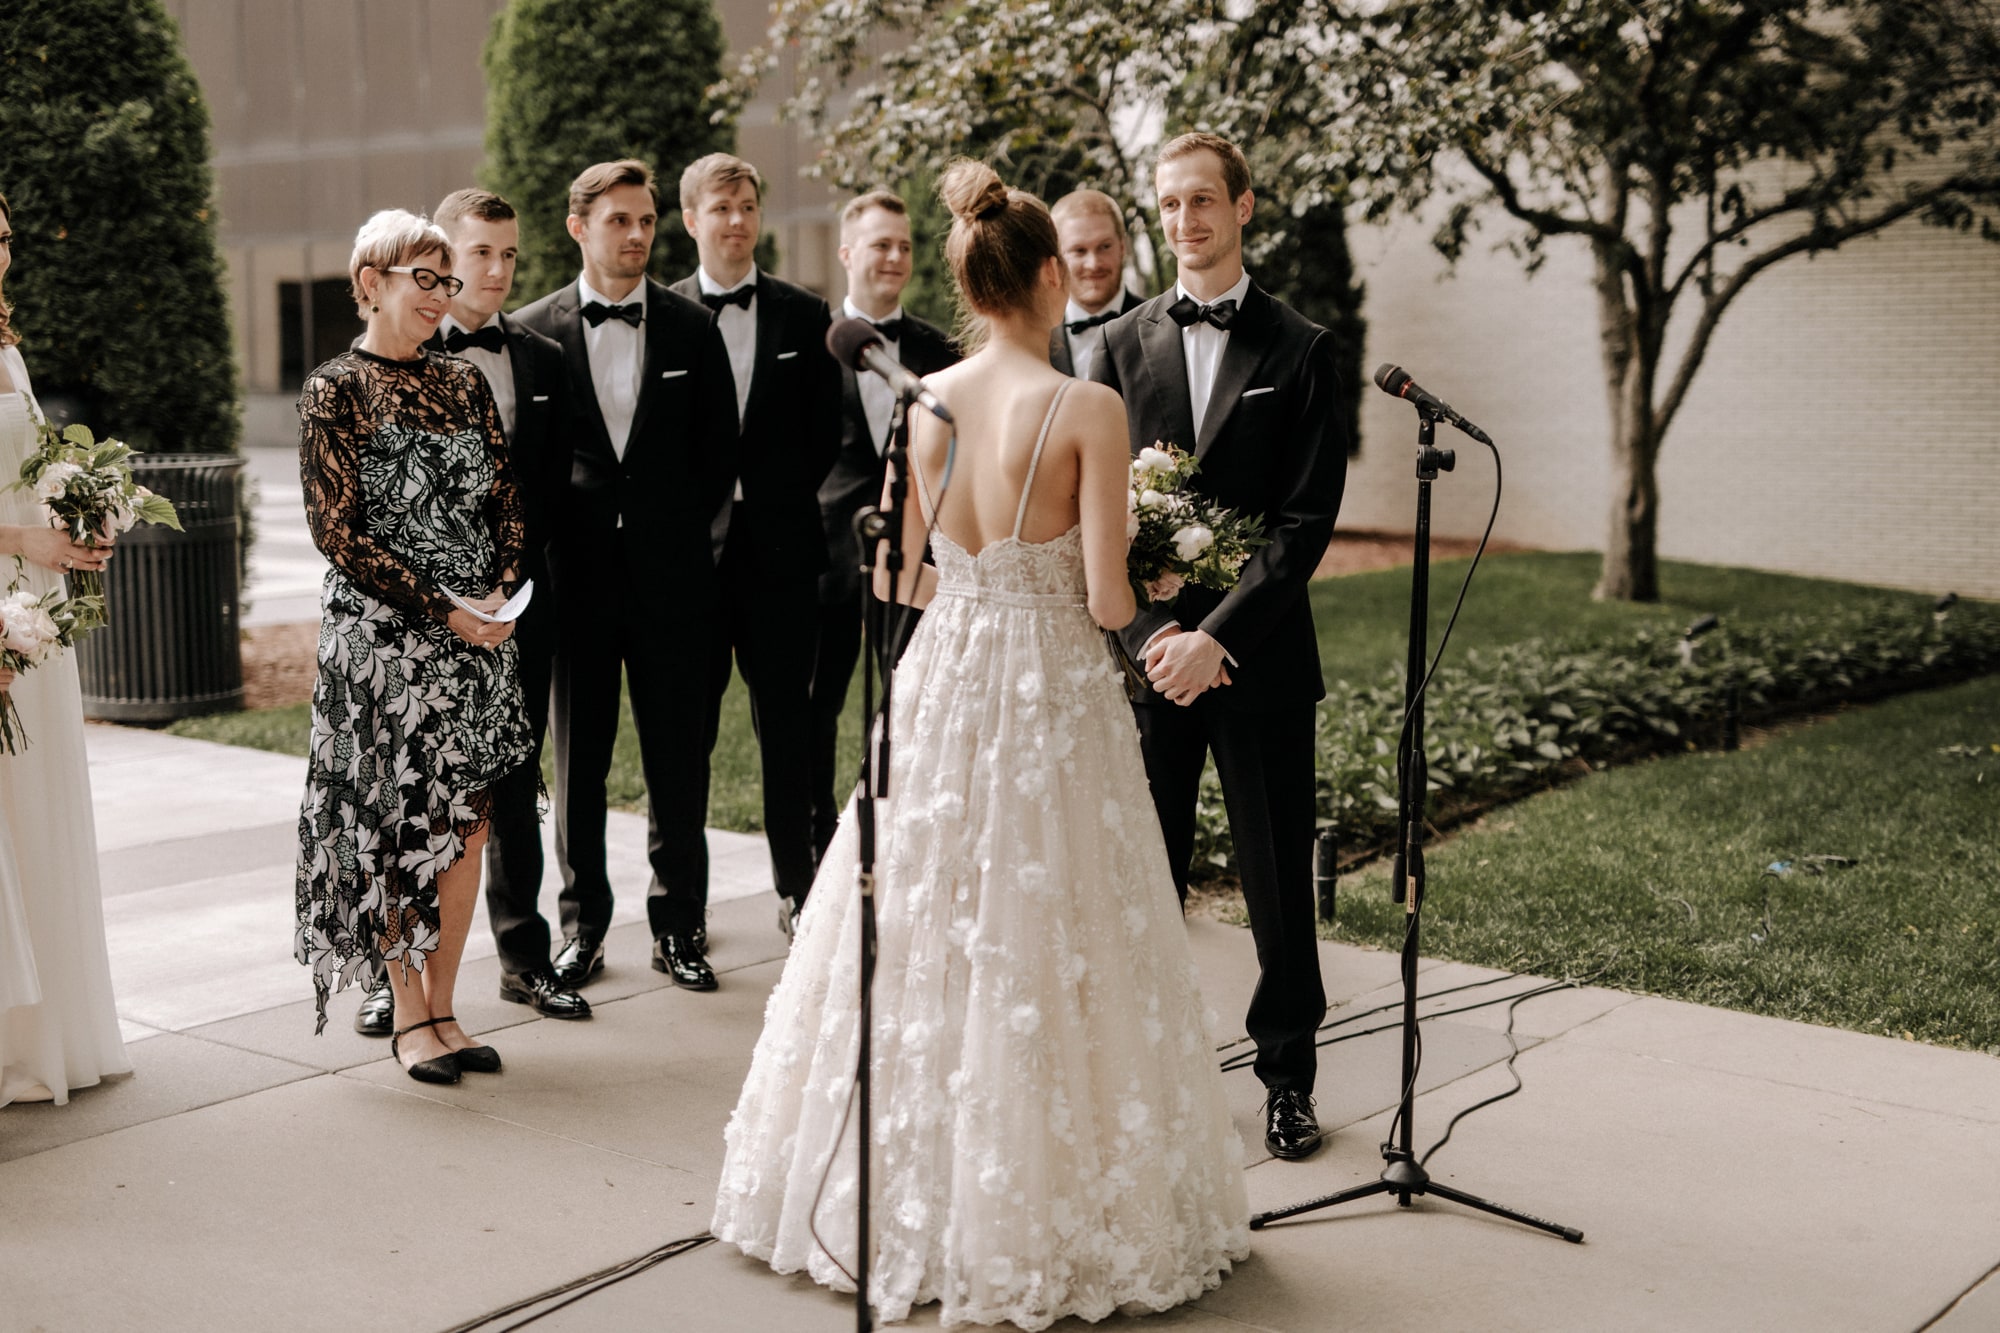 A bride and groom exchange vows while their wedding party watches happily during a wedding ceremony at the Minneapolis Institute of Art.